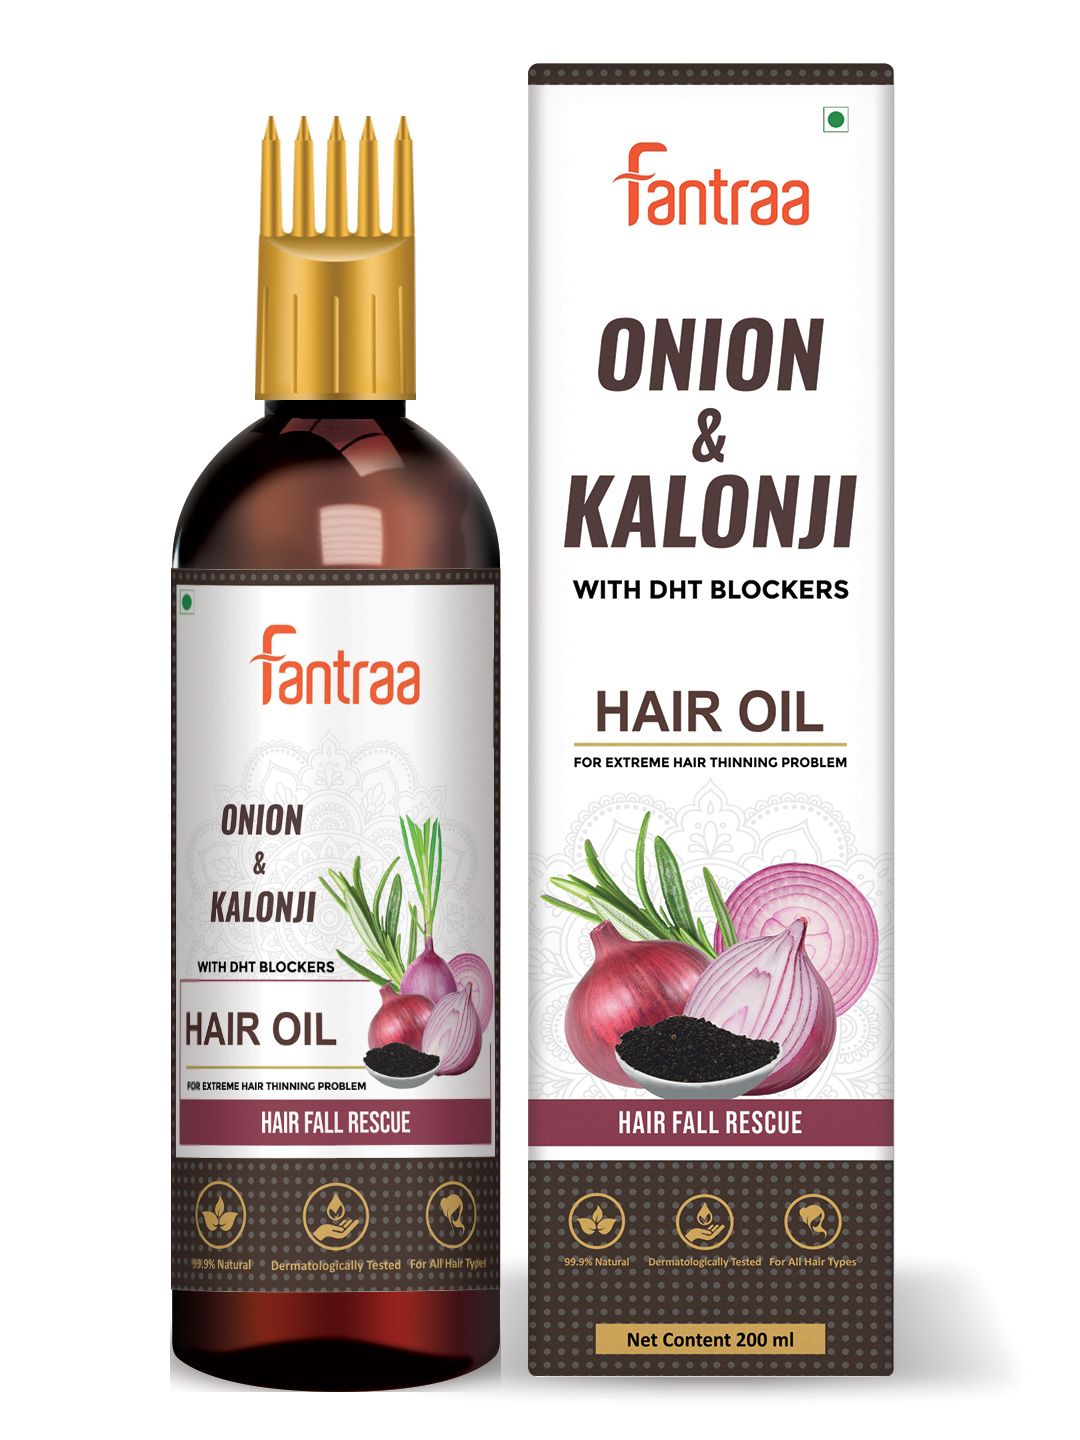 Fantraa Onion & Kalonji Hair Fall Rescue Hair Oil with DHT Blockers - 200 ml Price in India